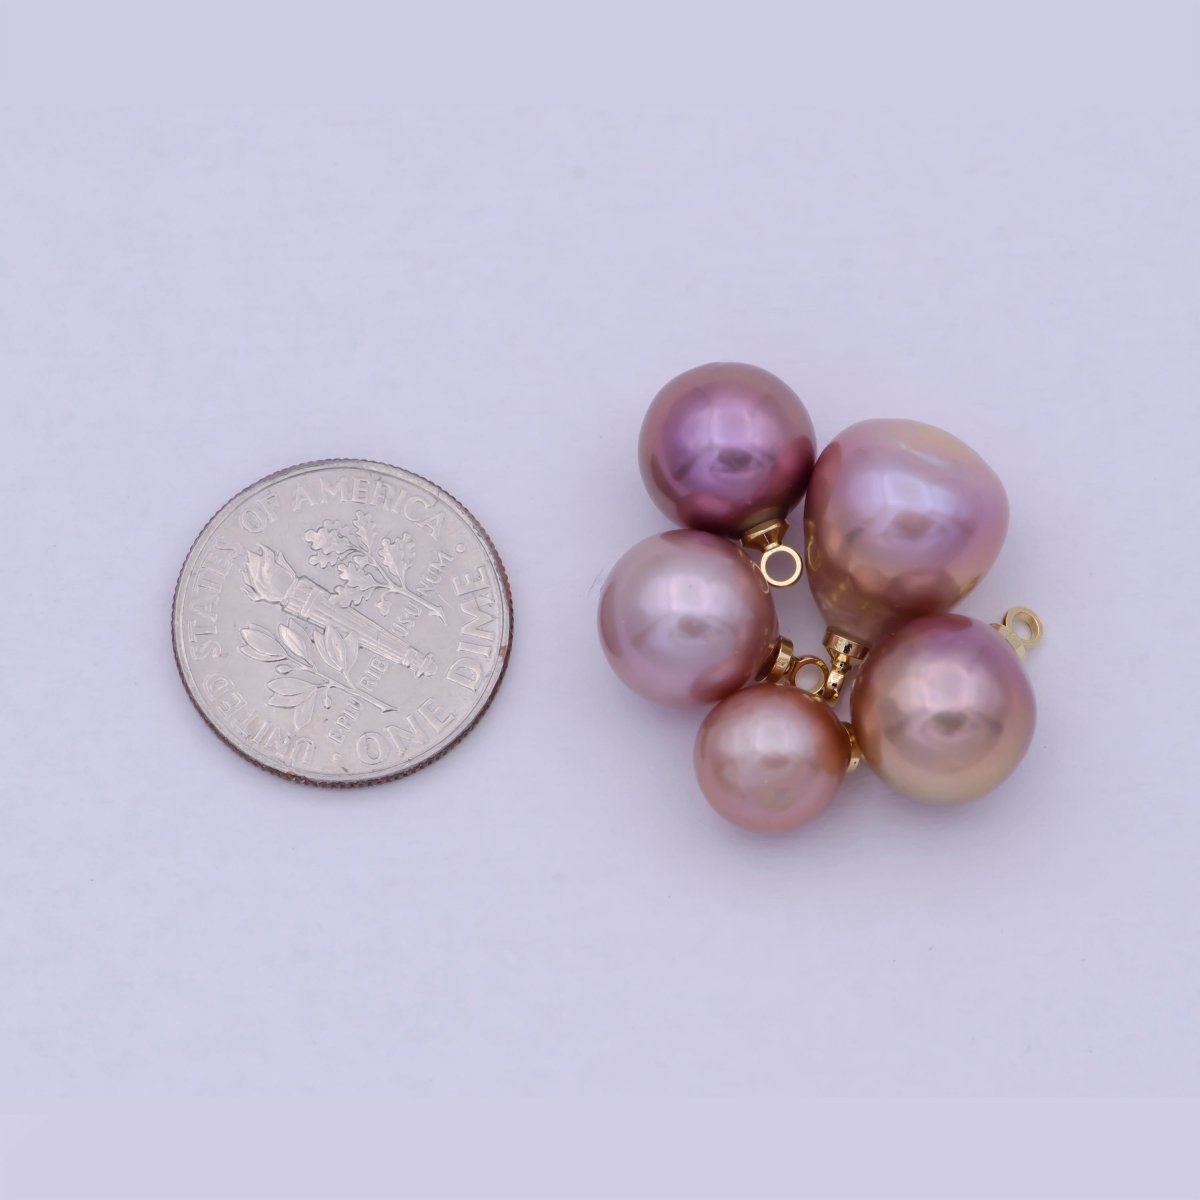 1x Natural fresh water pearl bead. 9-12mm Freeform Round Shape. Gorgeous natural purple pink color fresh water pearl bead High Quality X-722 - DLUXCA